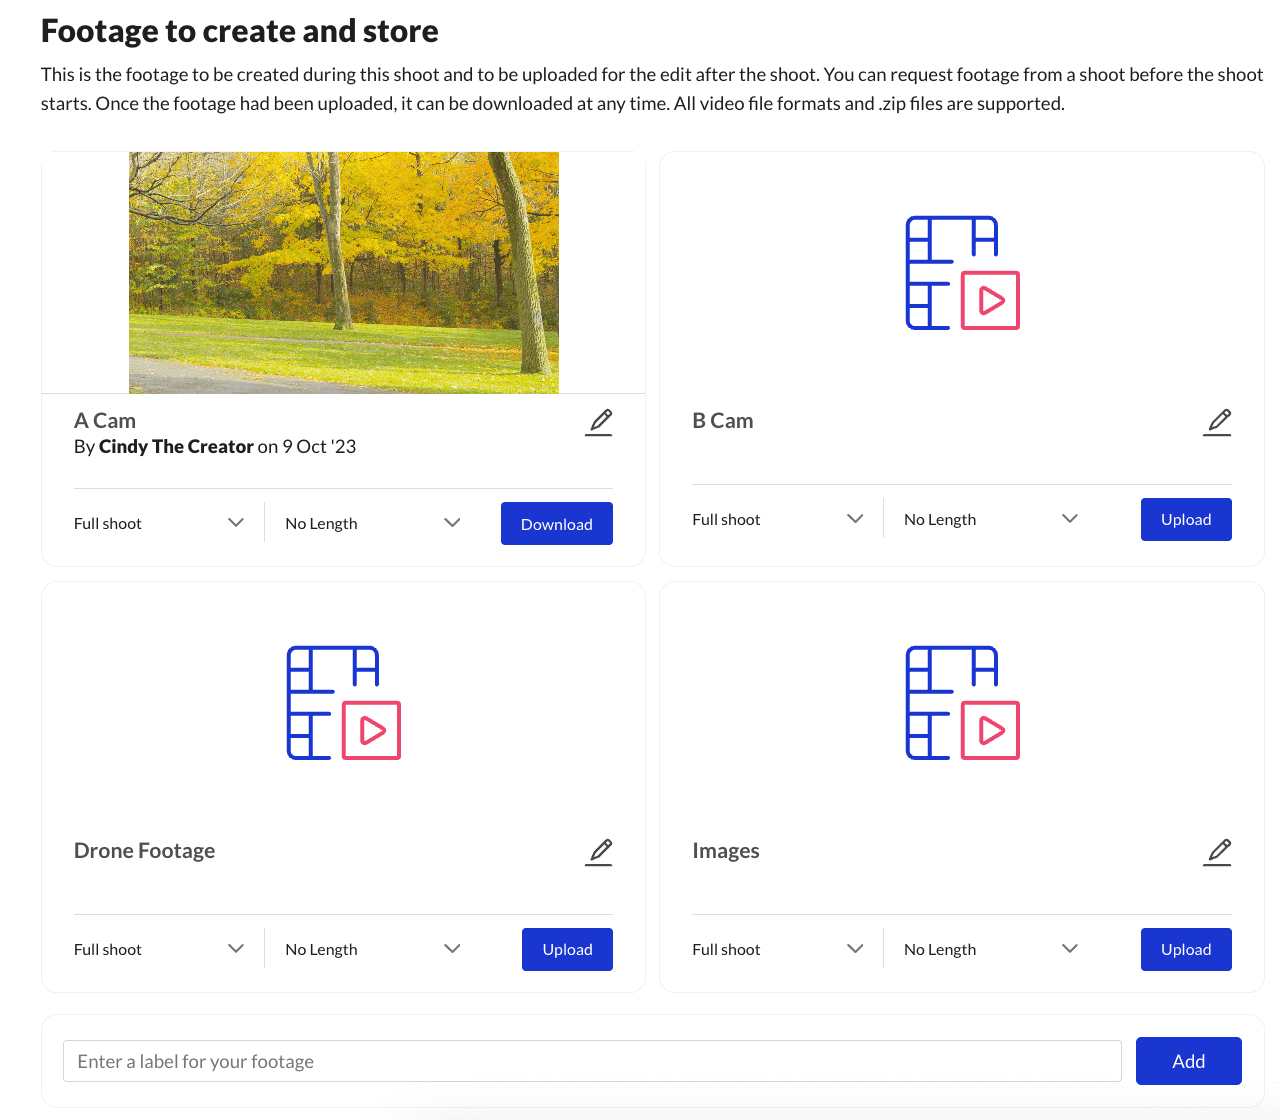 Navigate down the shoot page to the 'Footage to create and store' section